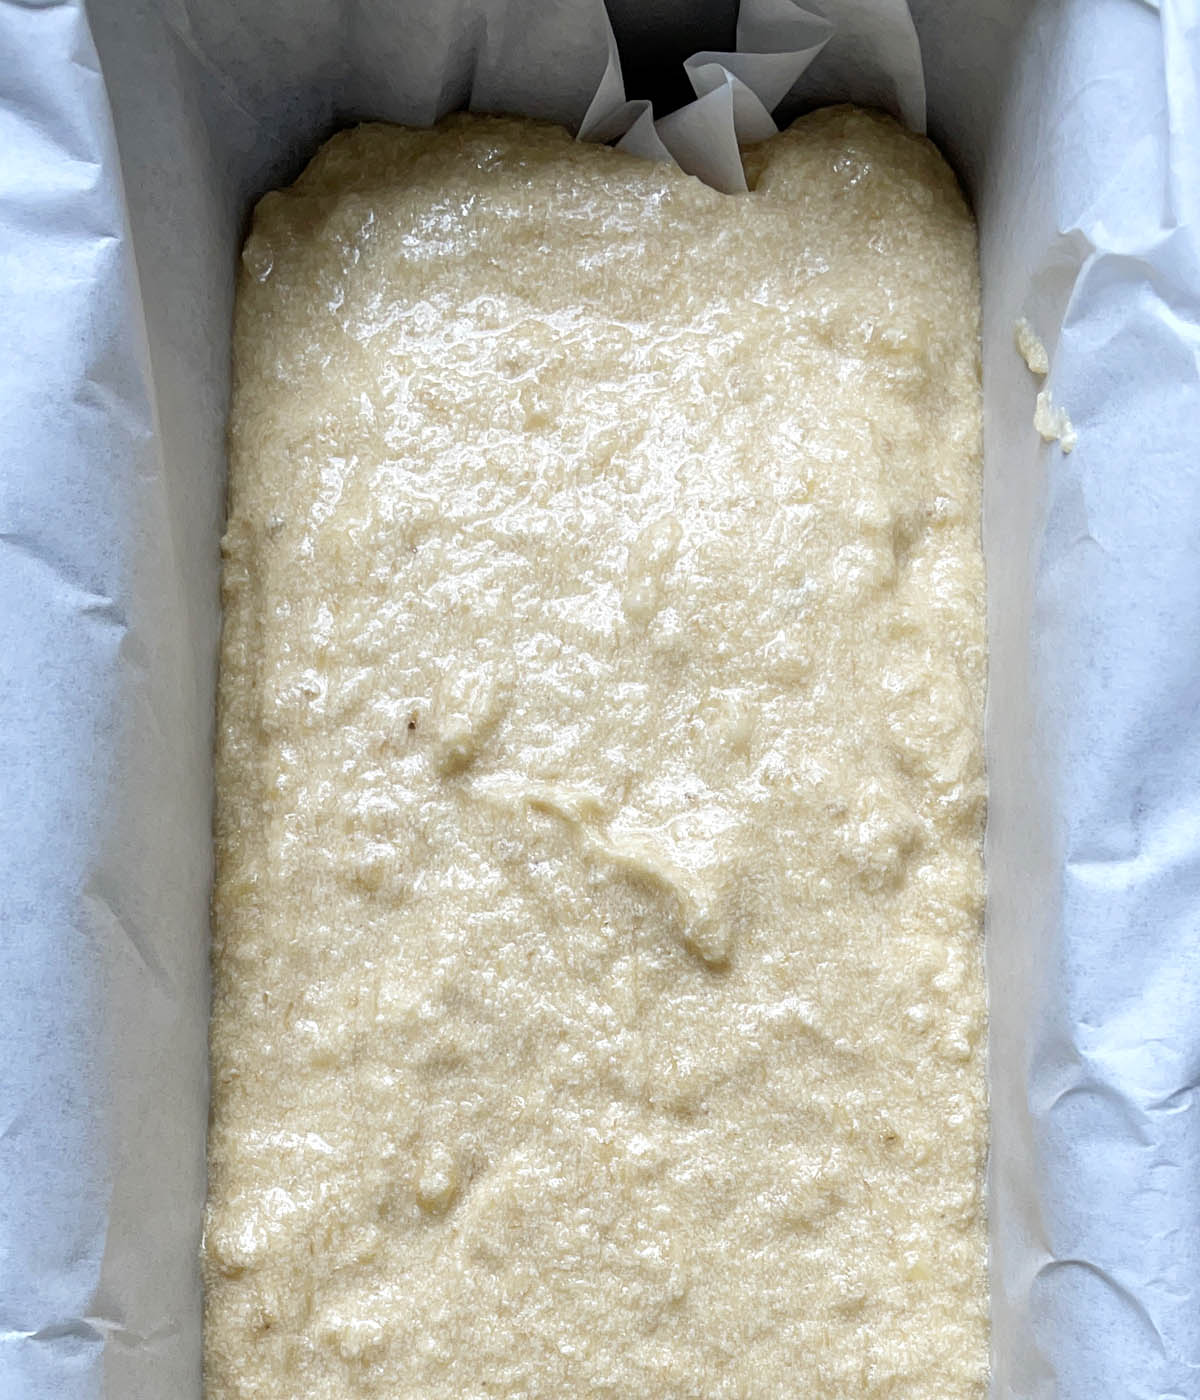 Raw bread batter in a paper lined pan.